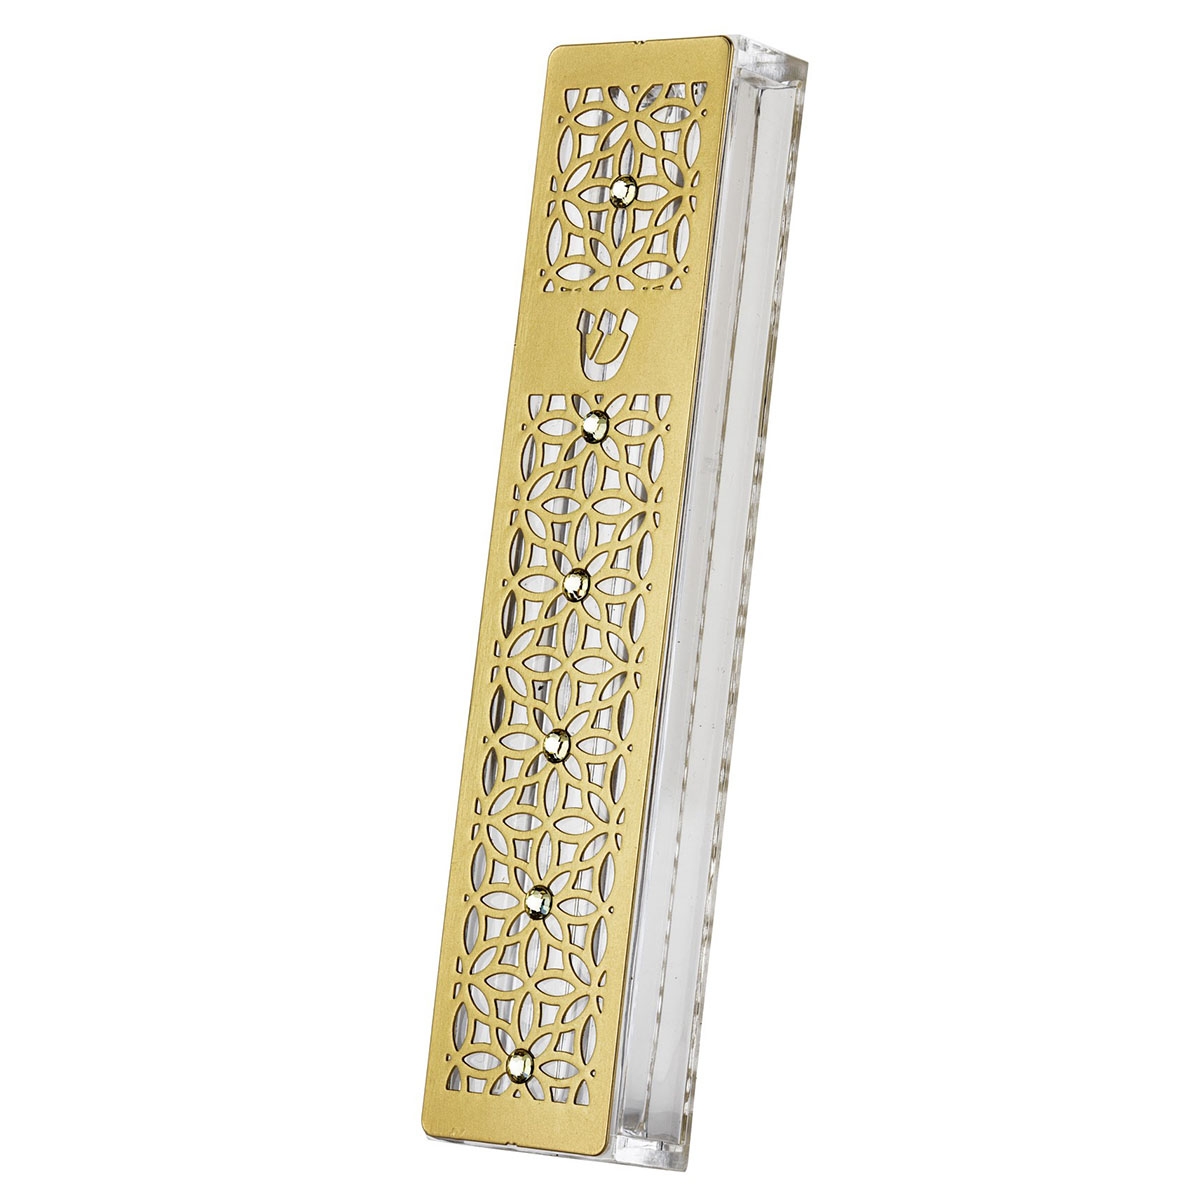 Dorit Judaica Gold-Plated Acrylic Mezuzah Case With Abstract Design - 1